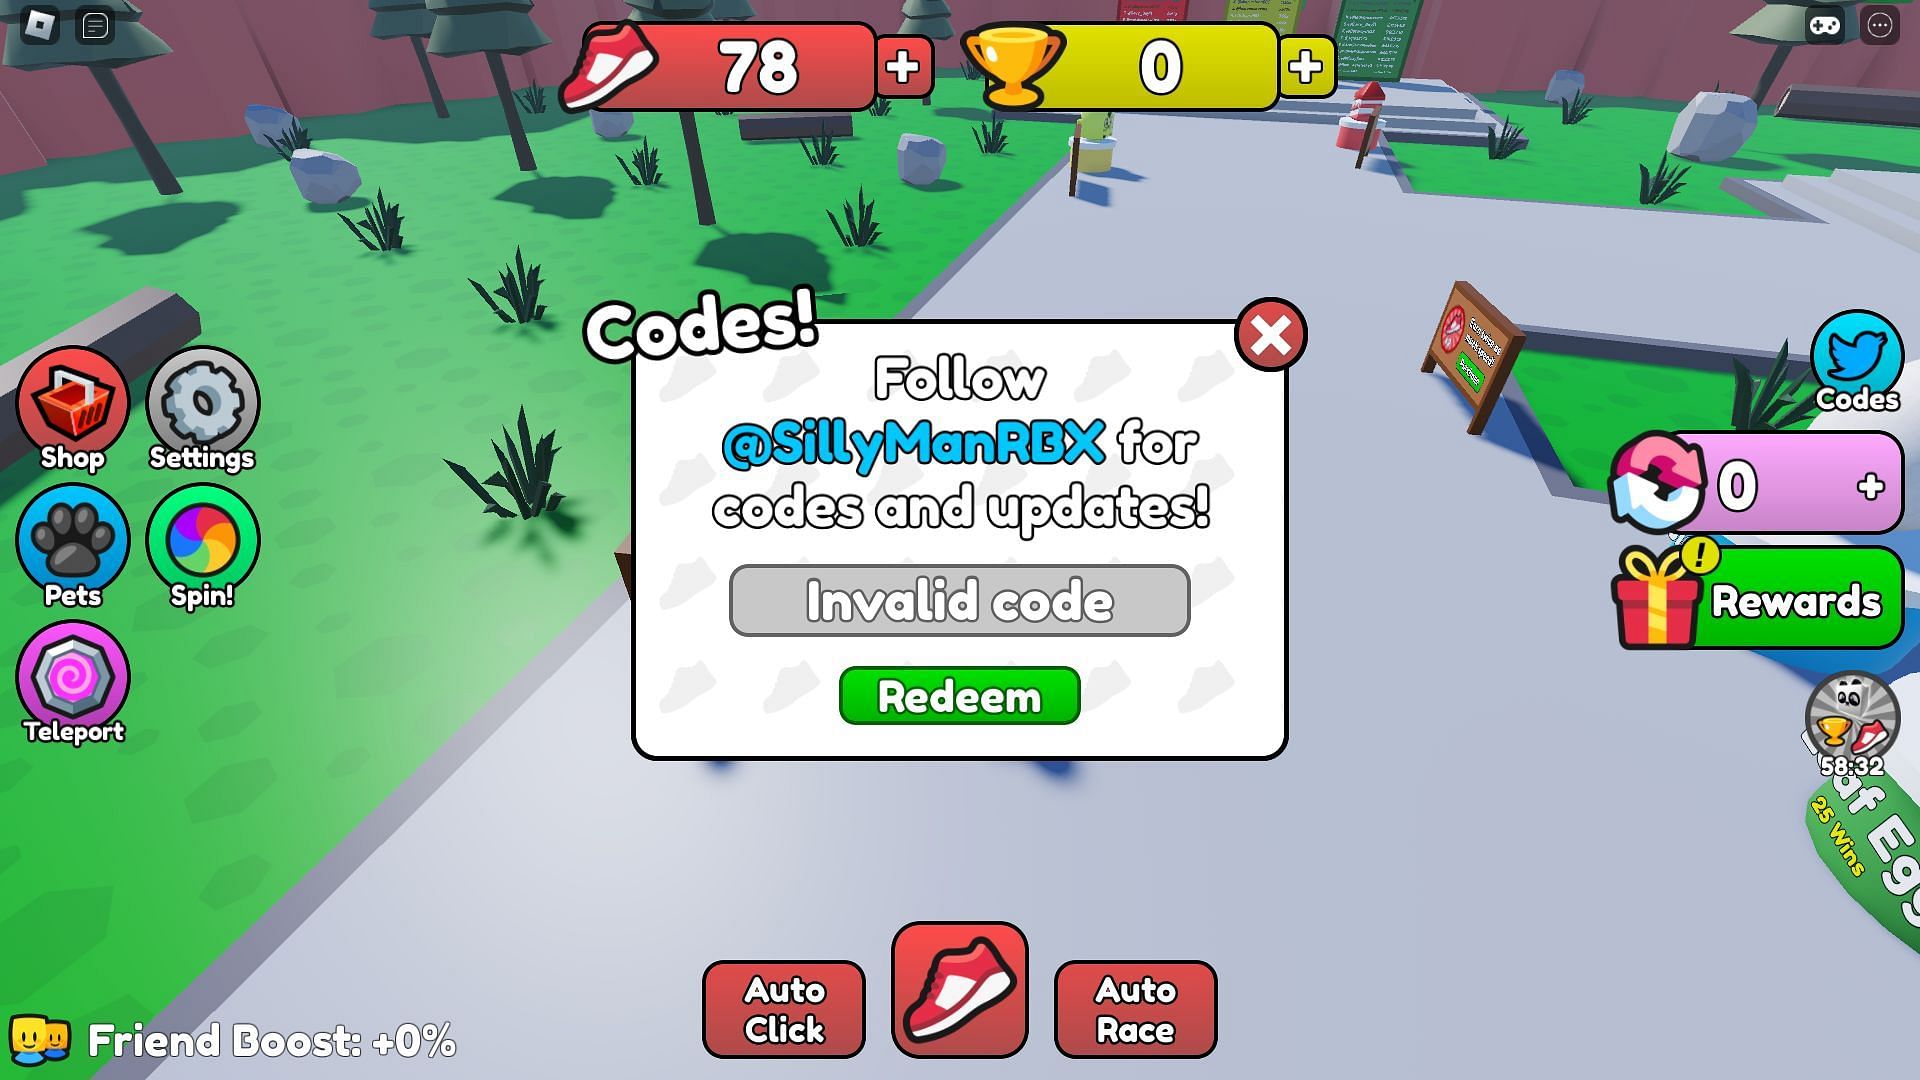 Troubleshooting codes for Catch Me If You Can (Image via Roblox)